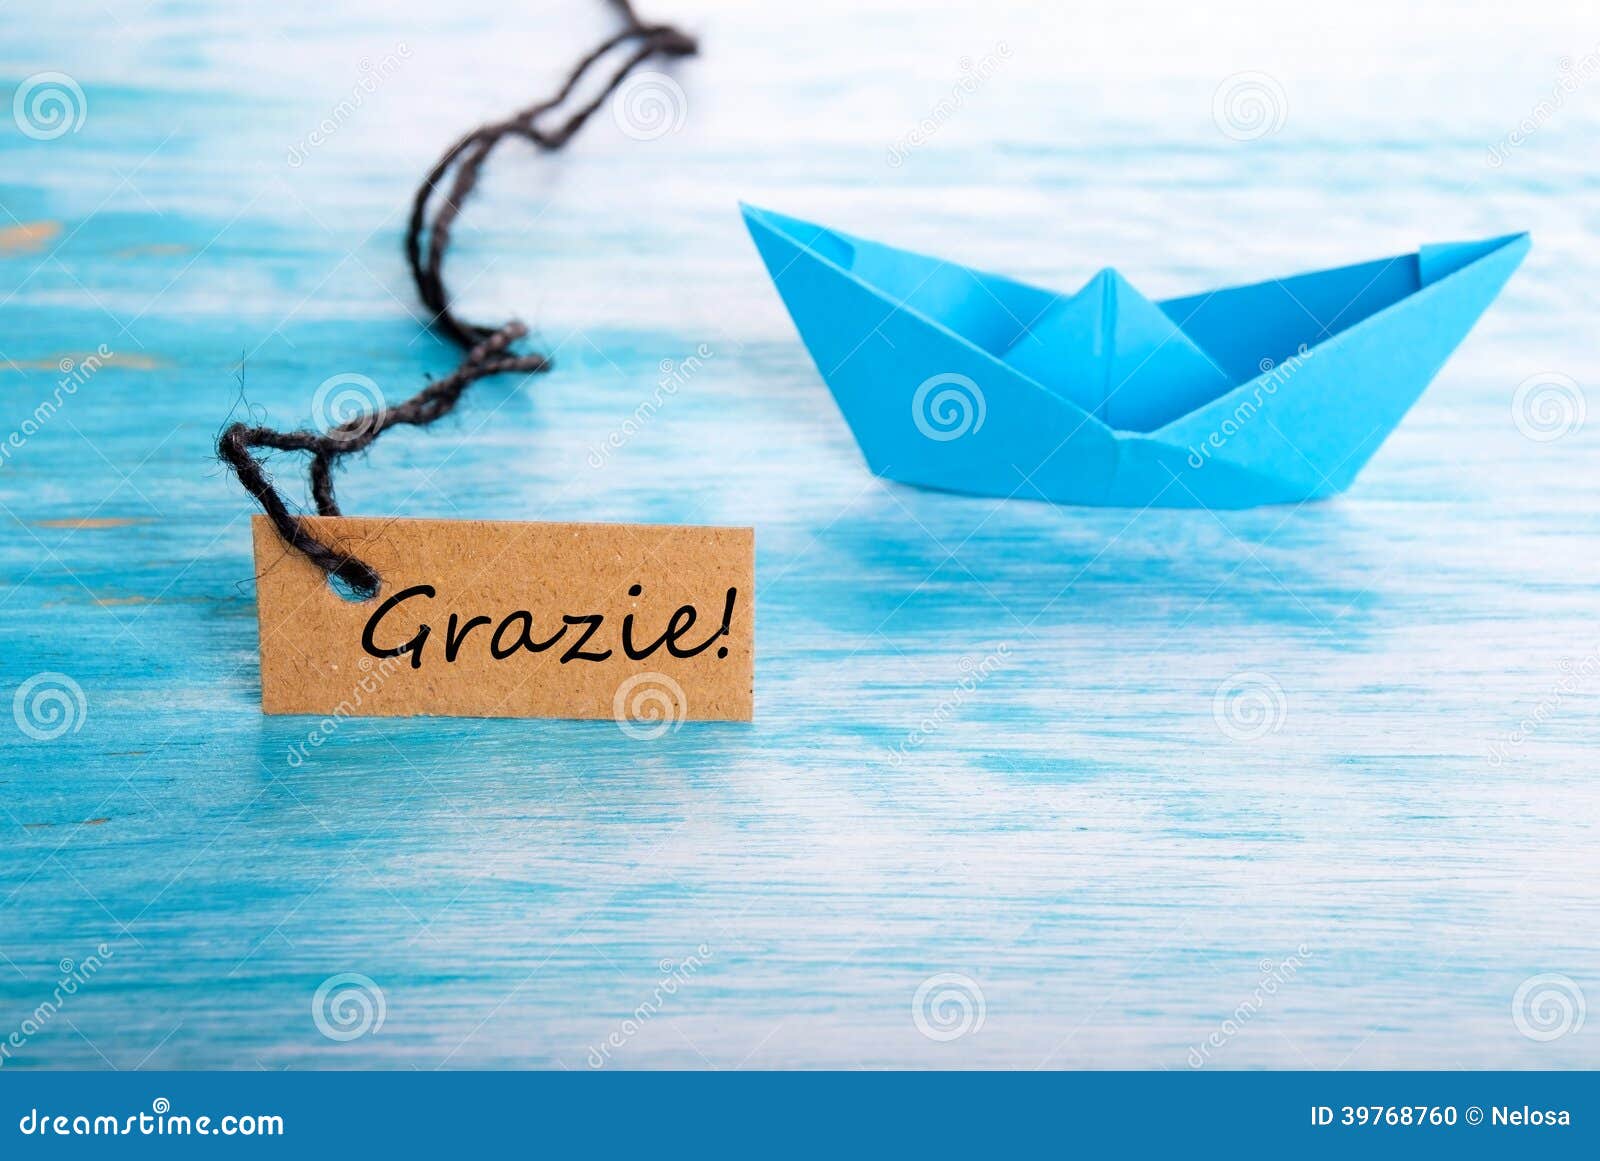 Label with the Italian Word Grazie which means Thanks and a Boat.